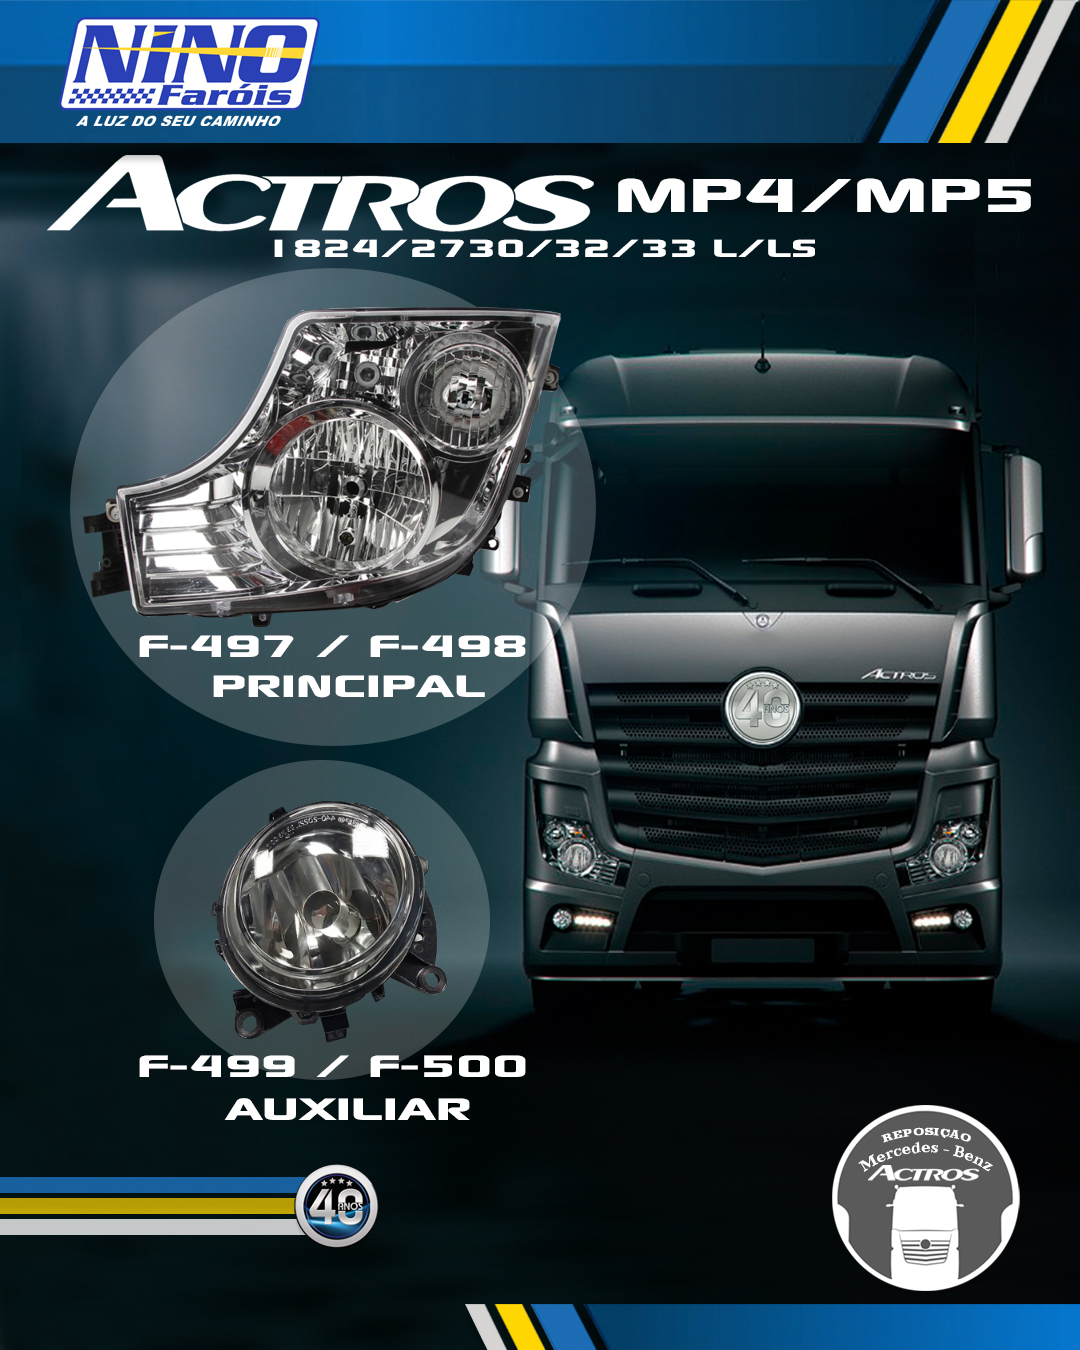 Actros MP4 MP5 F-497 - F-498. F-499 - F-500